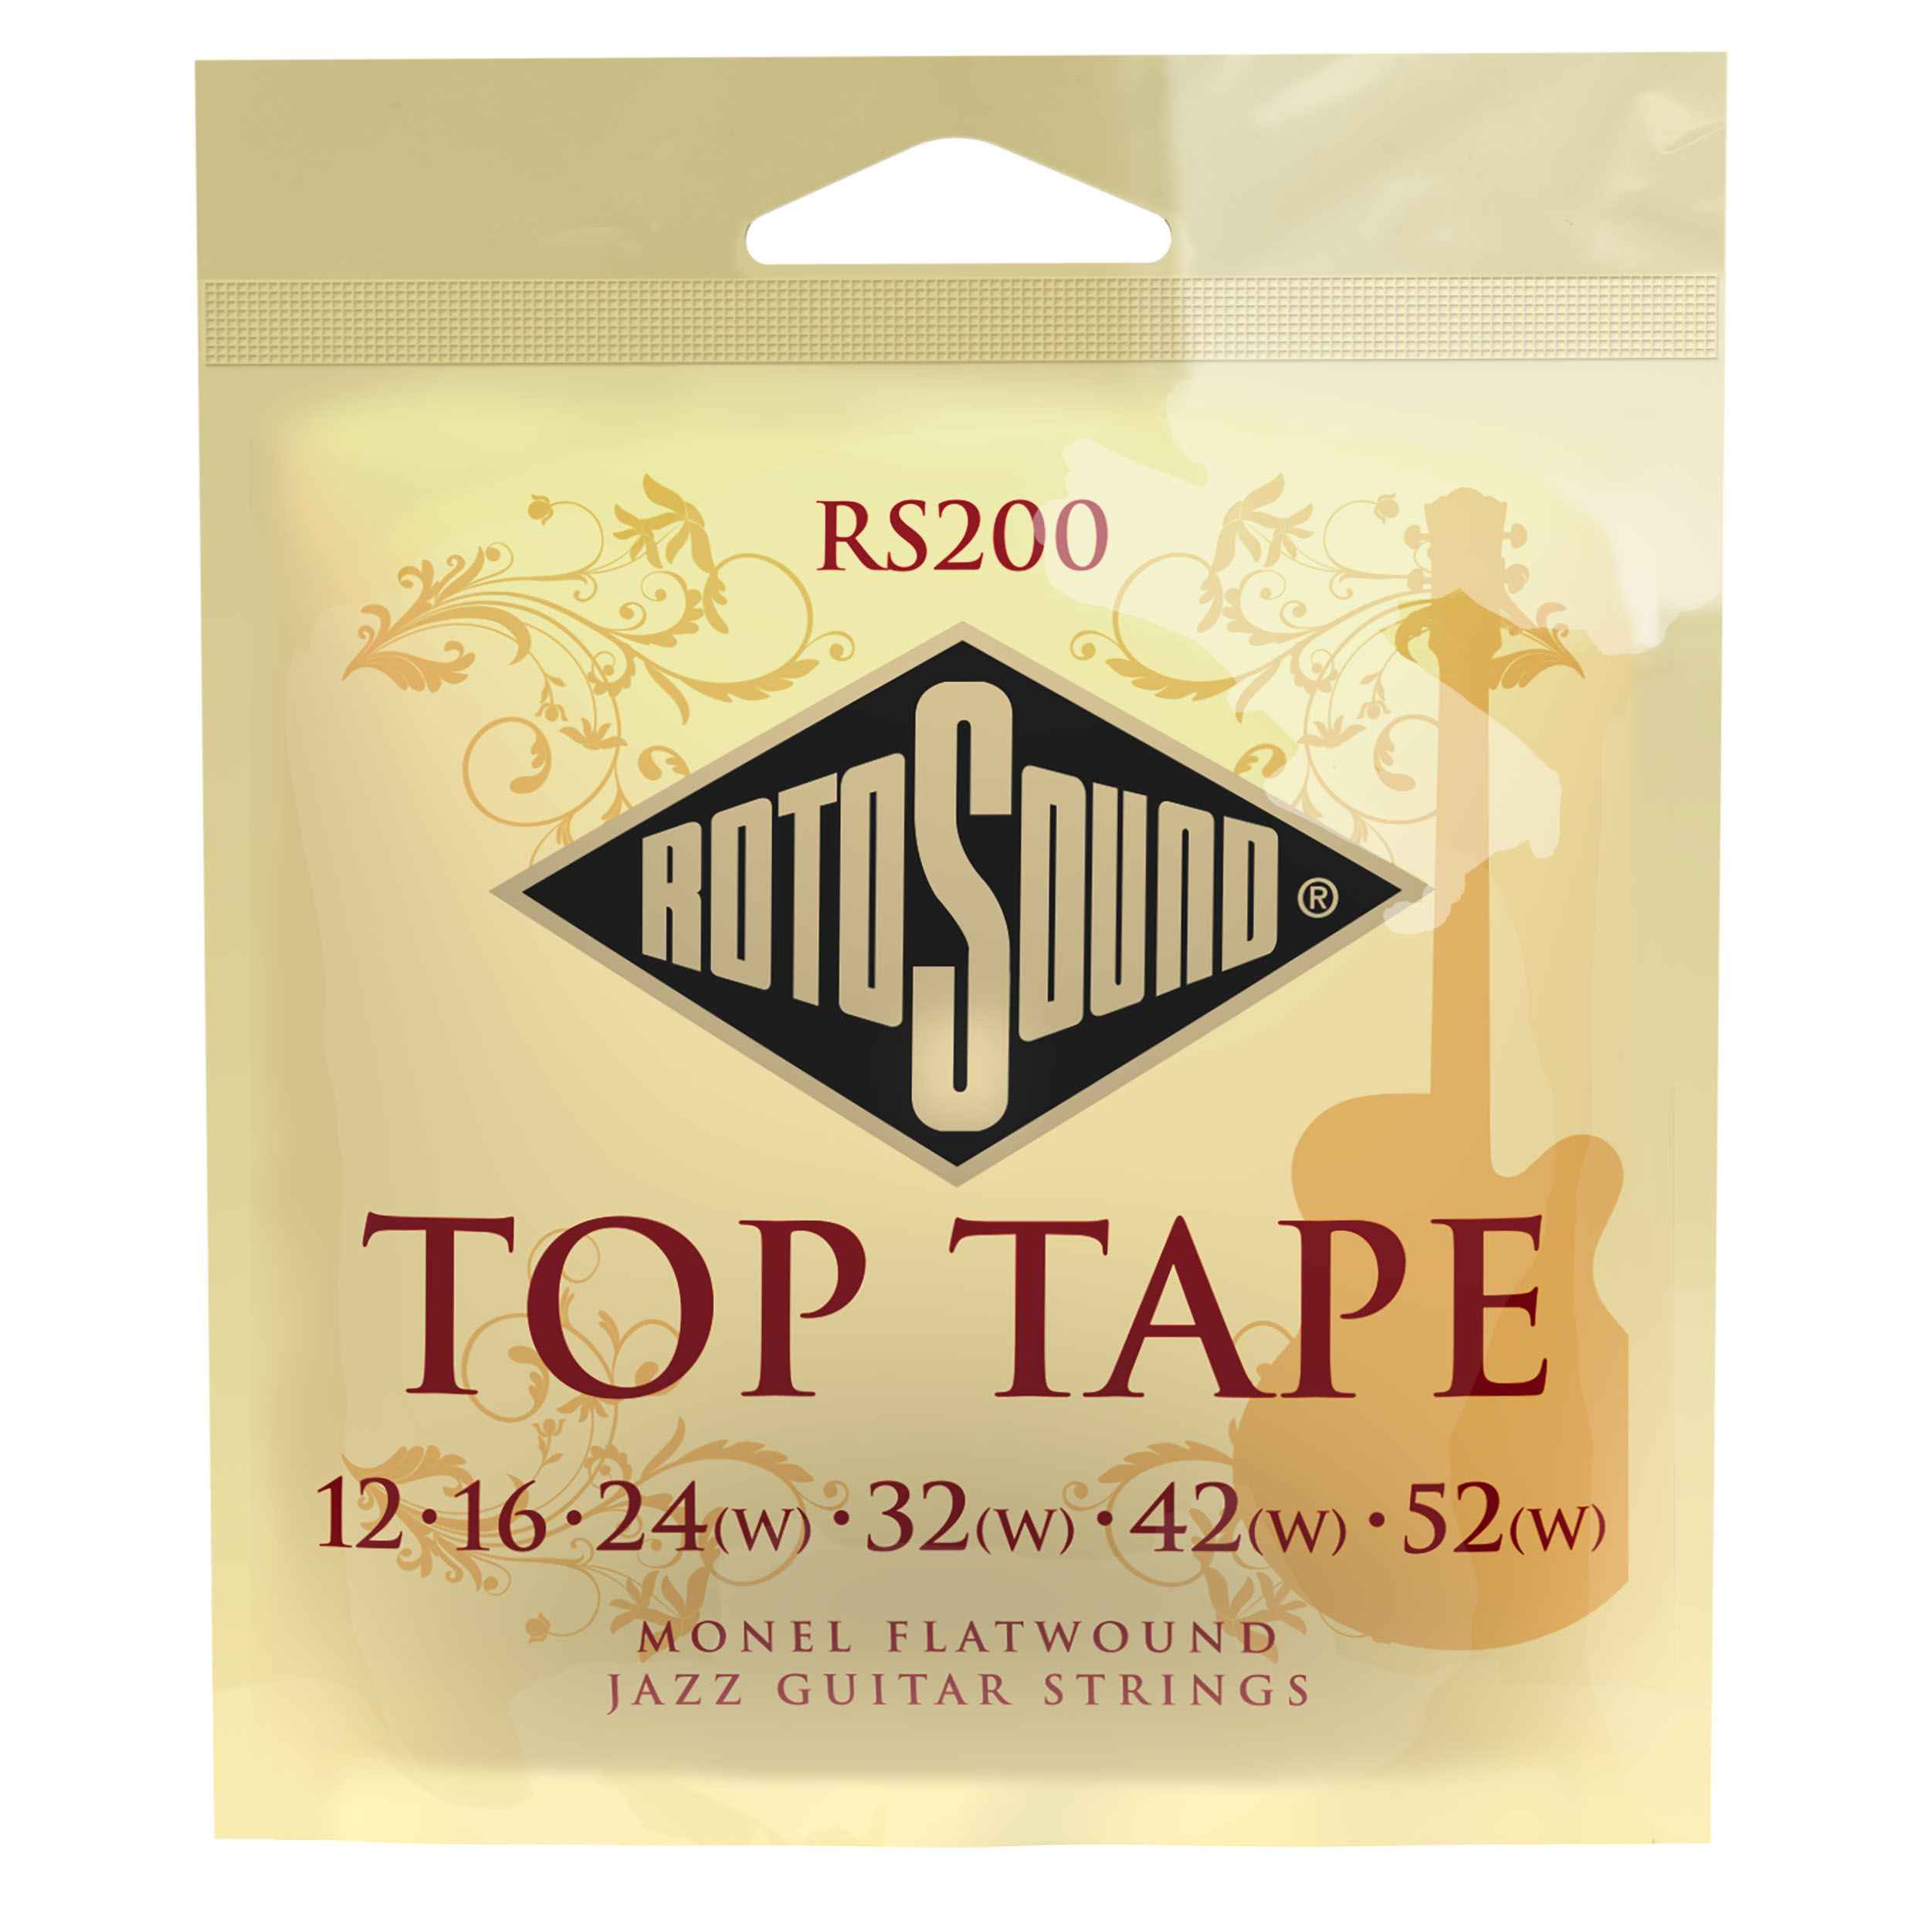 Top Tape Flatwound Electric Guitar | 12-52 • Rotosound Music Strings